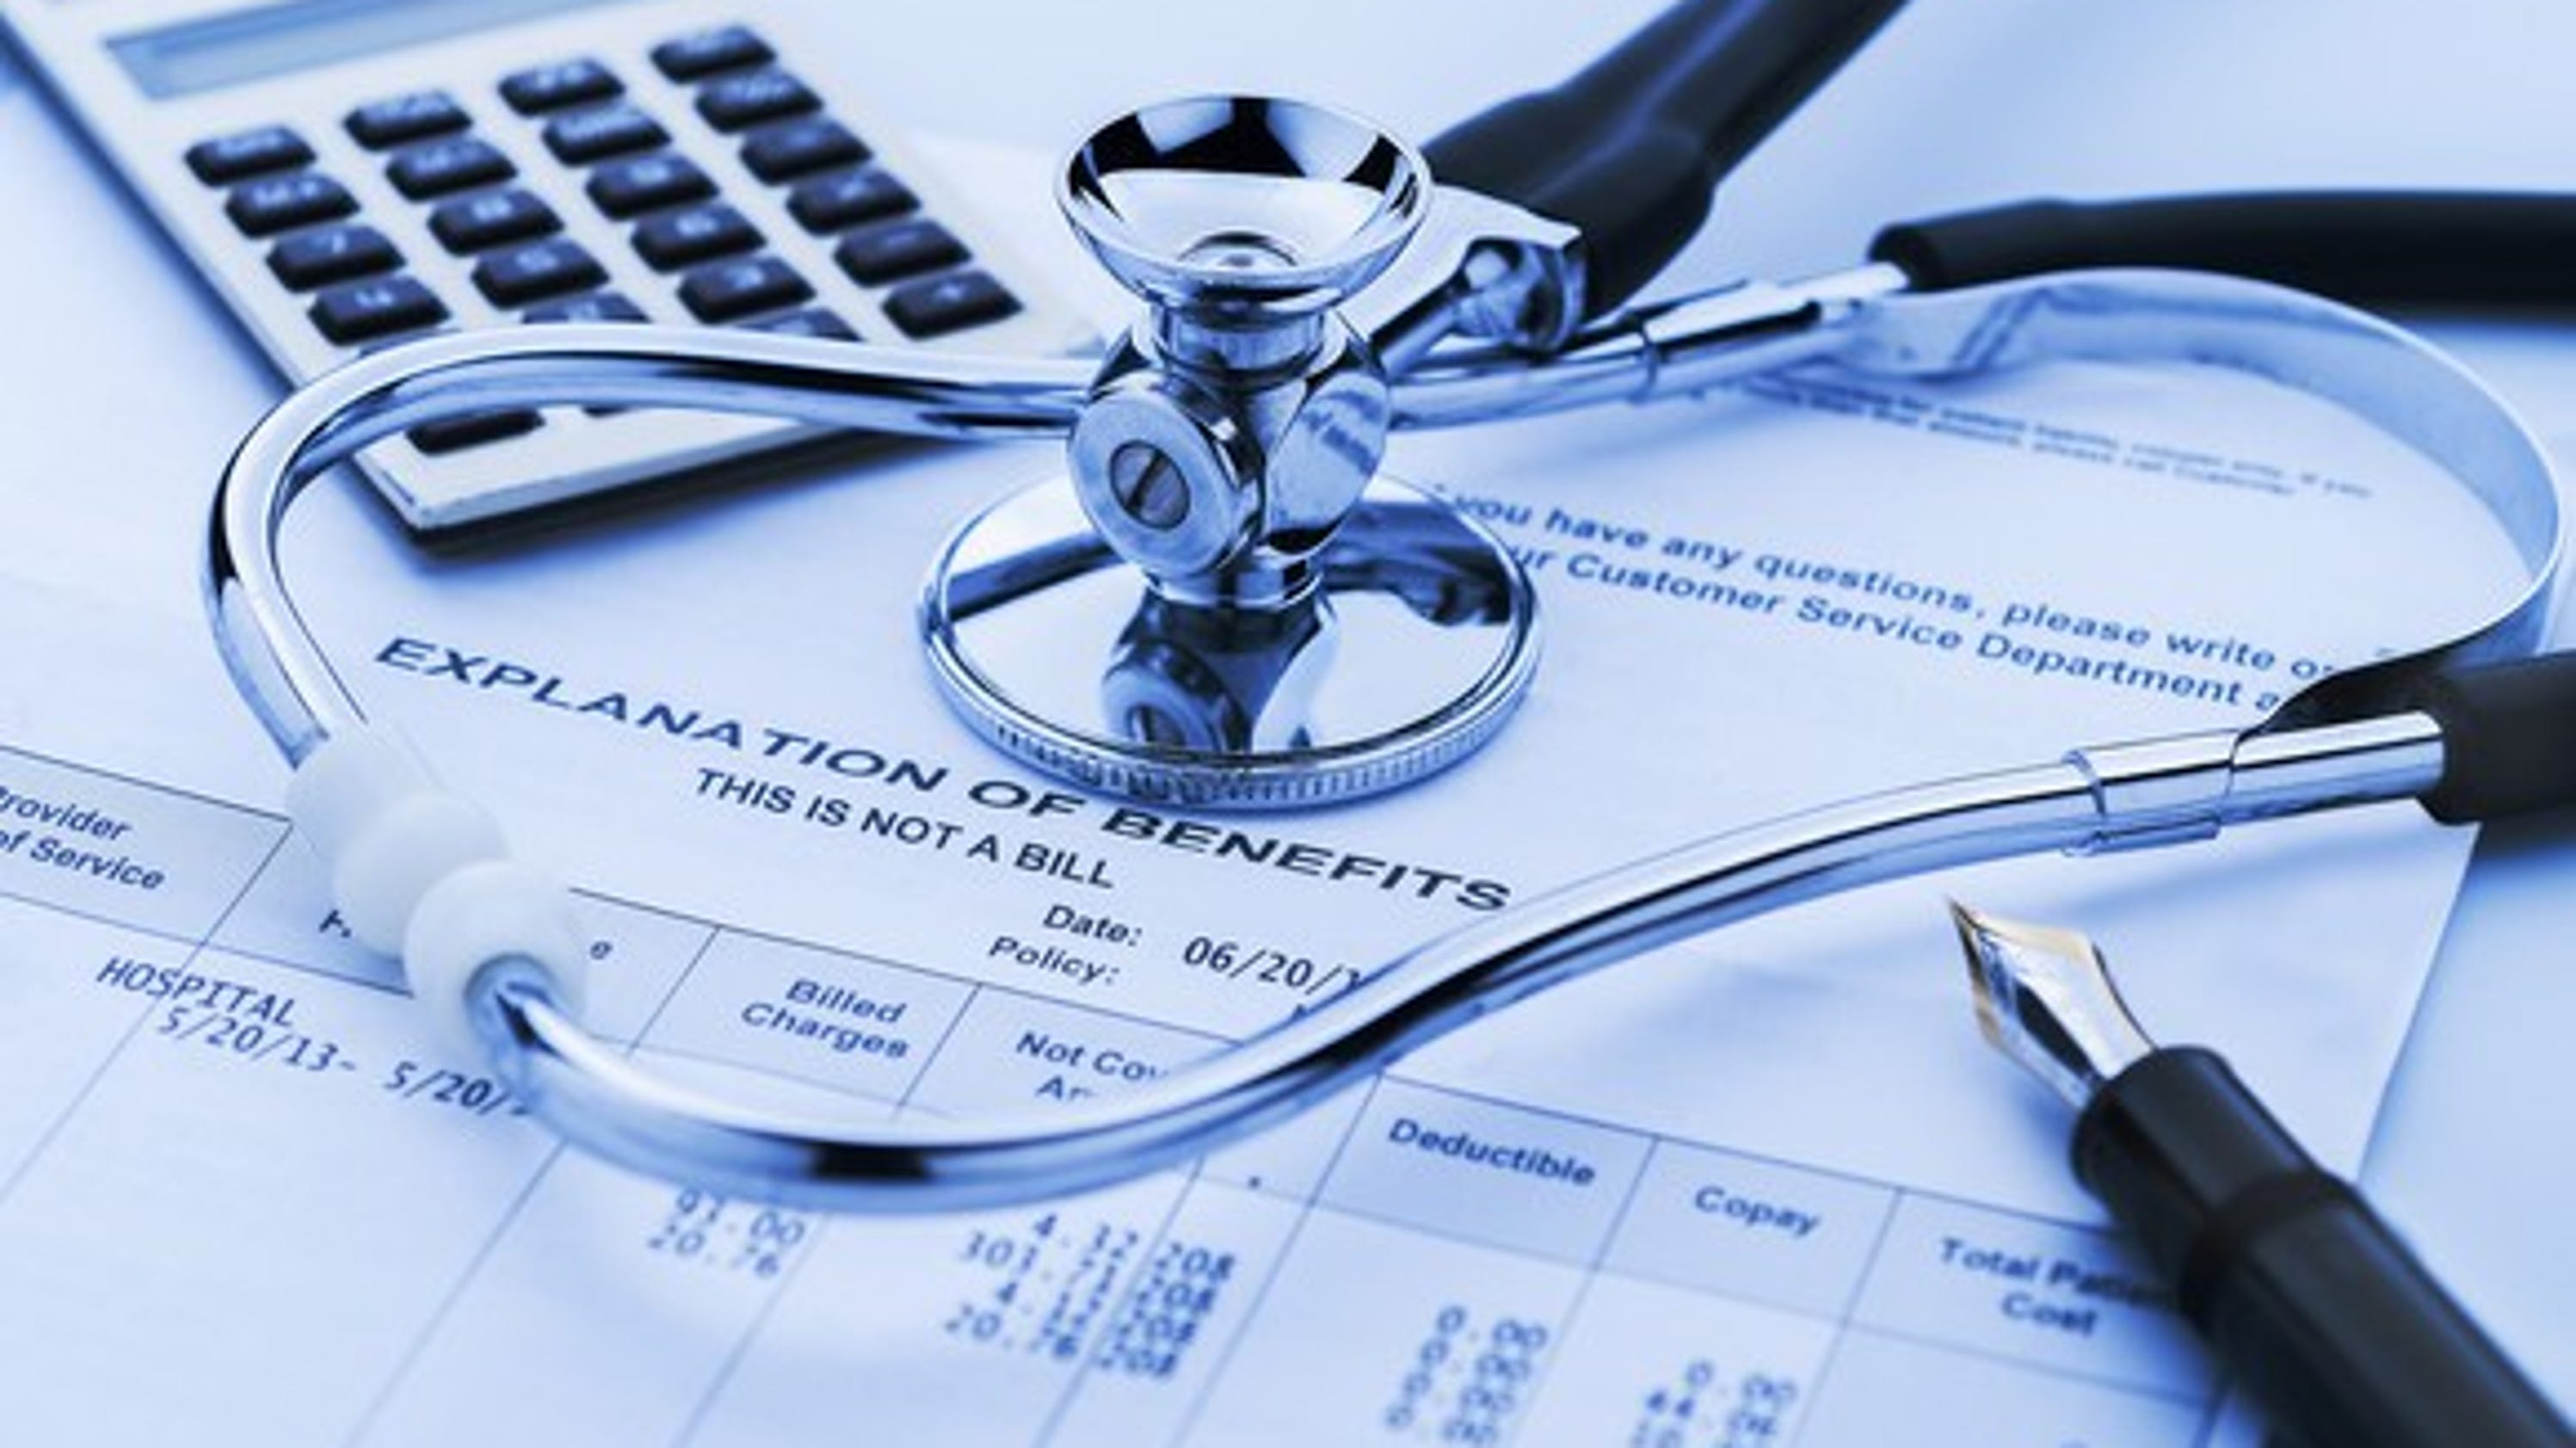 Weighing your health insurance options? Here are the Top 10 things to consider